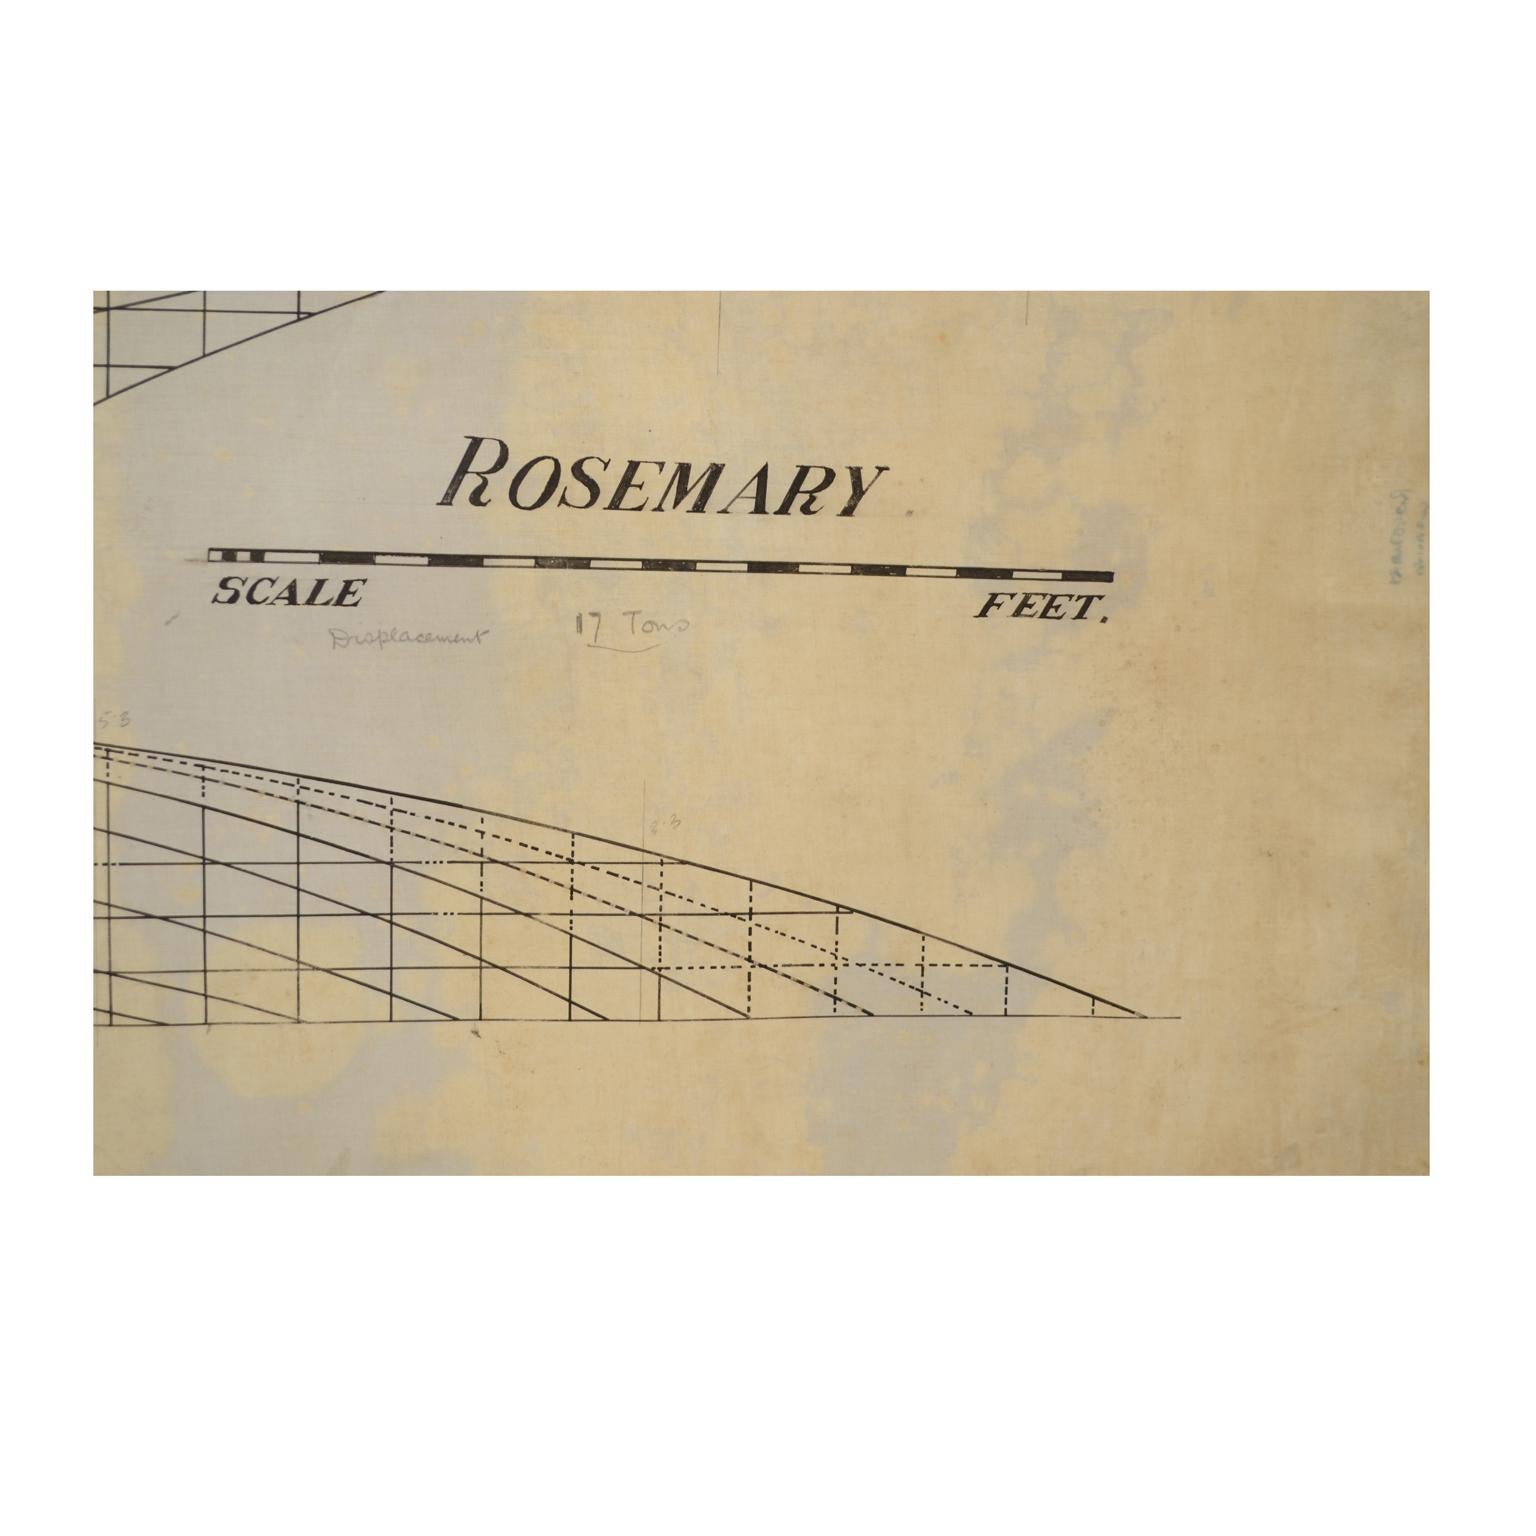 Paper 1920s Nautical Rosemary Old Ship Project by William Fife III Uffa Fox archives